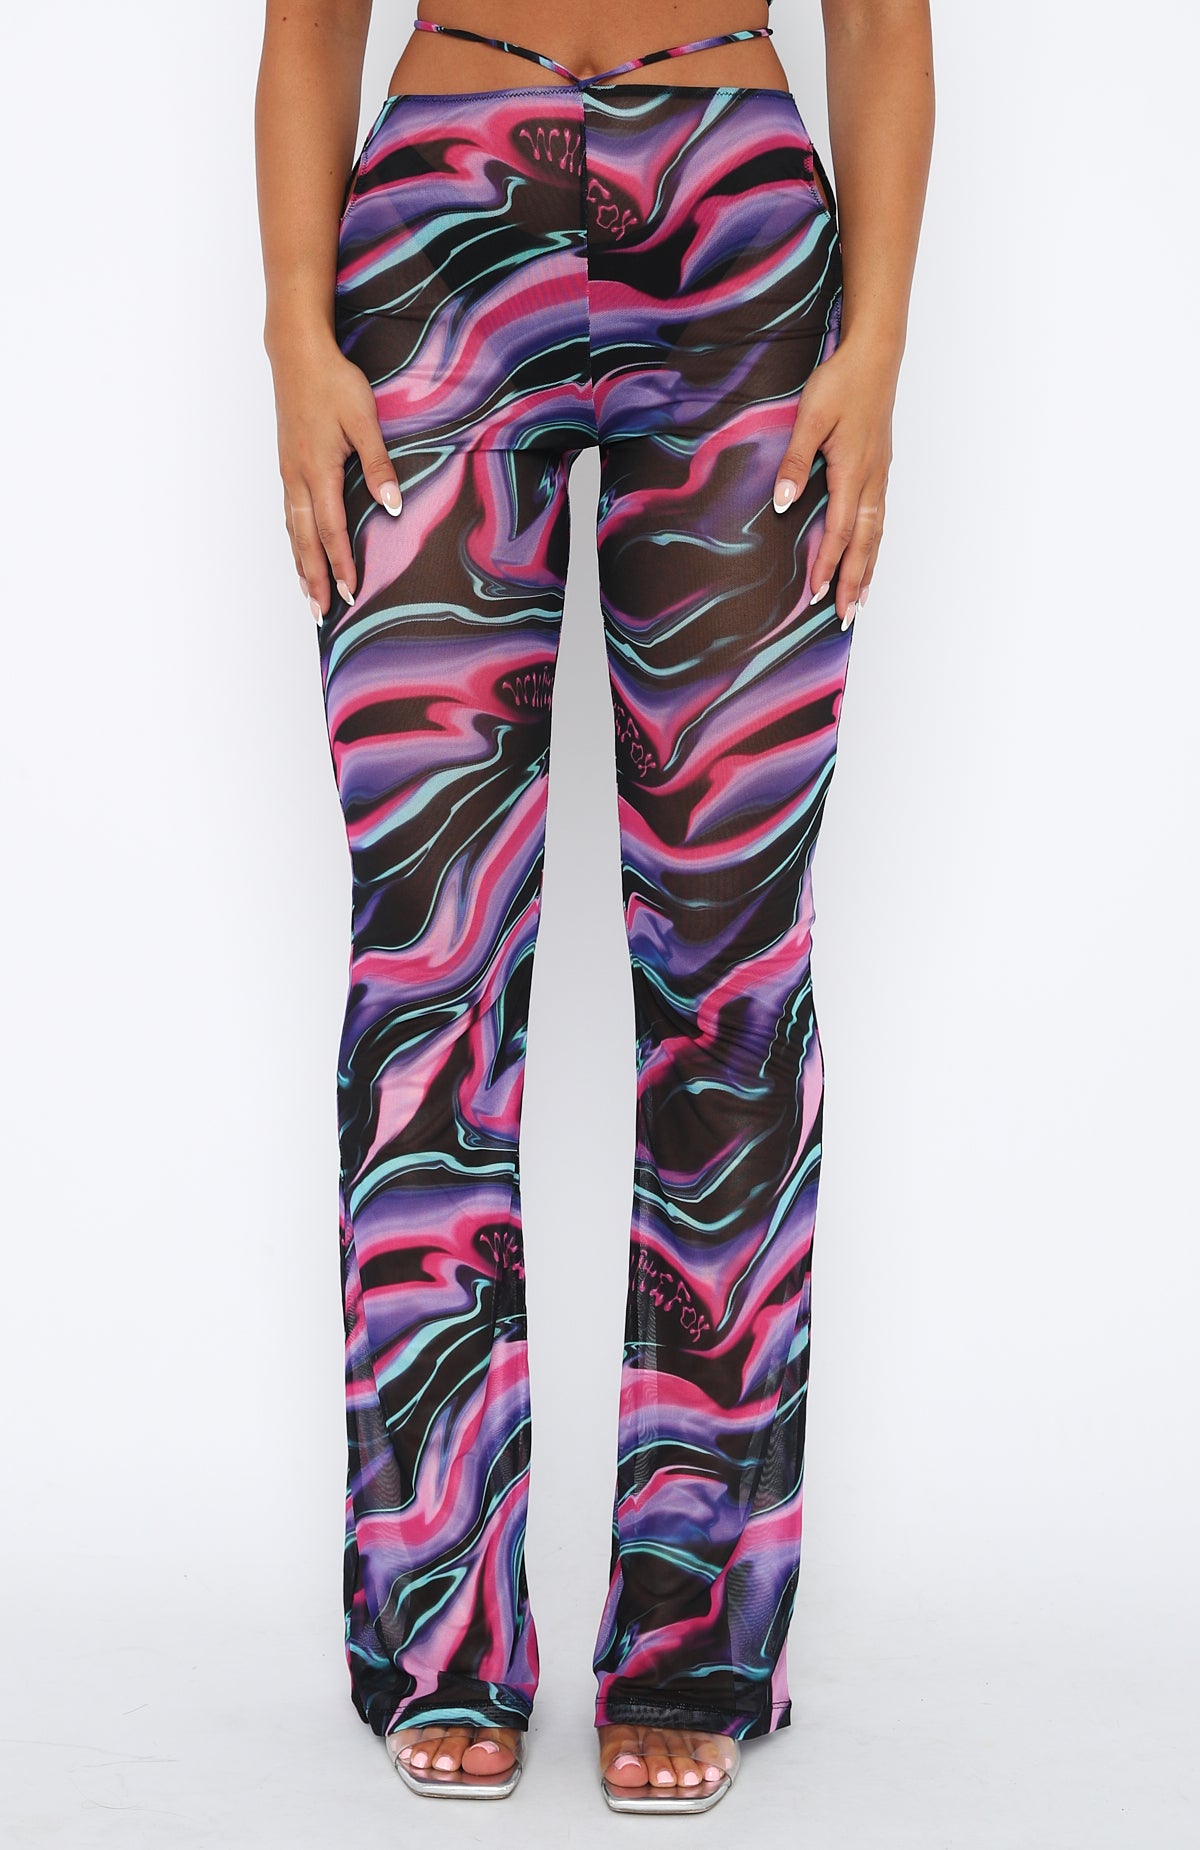 Rhythm Of The Night Pants Intergalactic | White Fox Boutique US